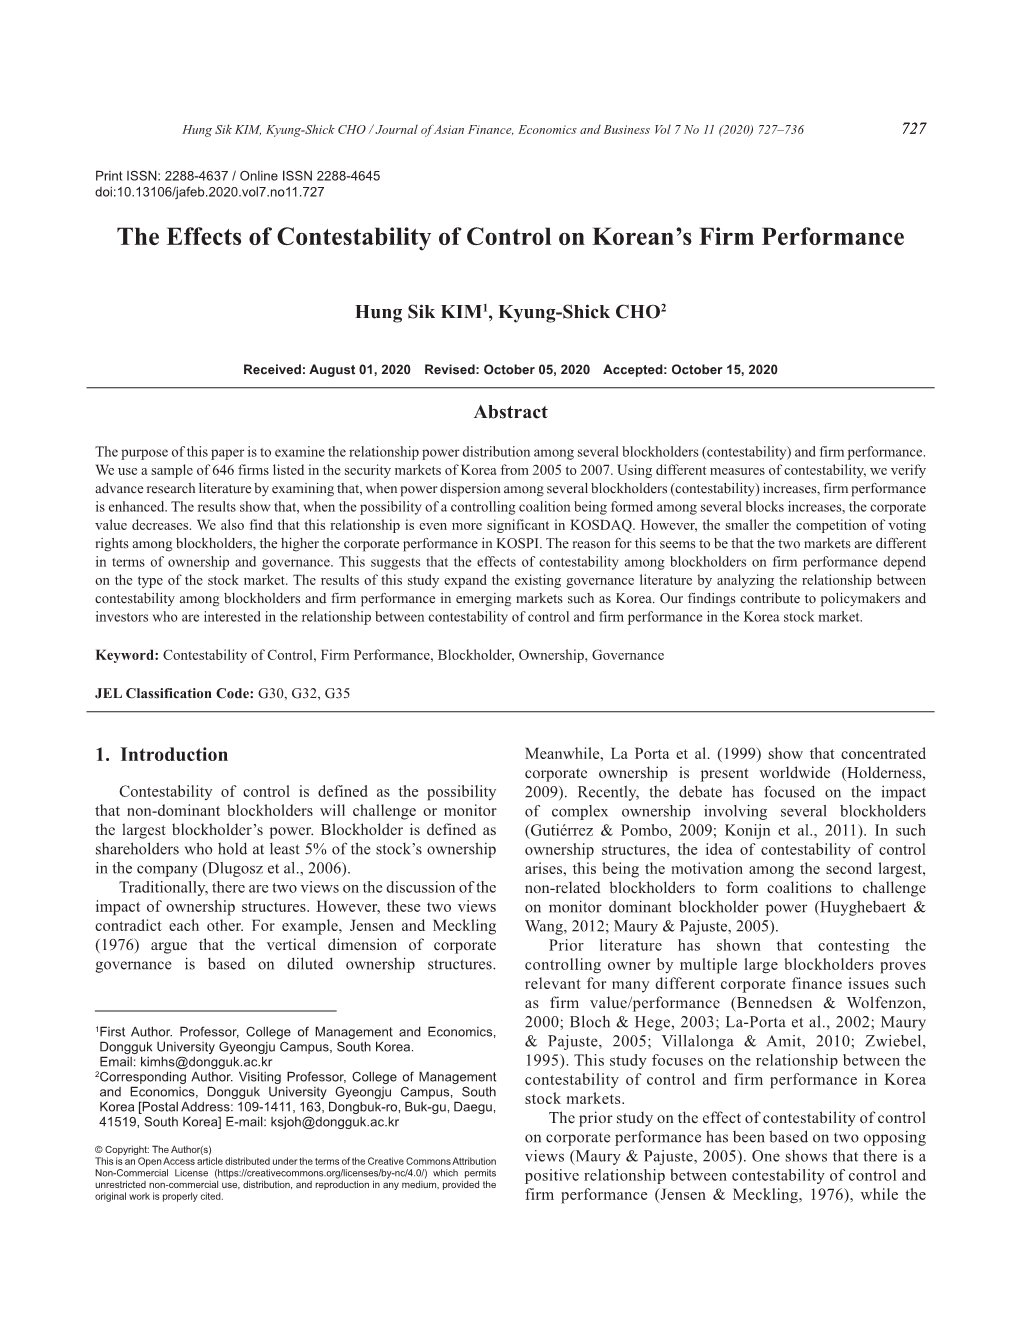 The Effects of Contestability of Control on Korean's Firm Performance